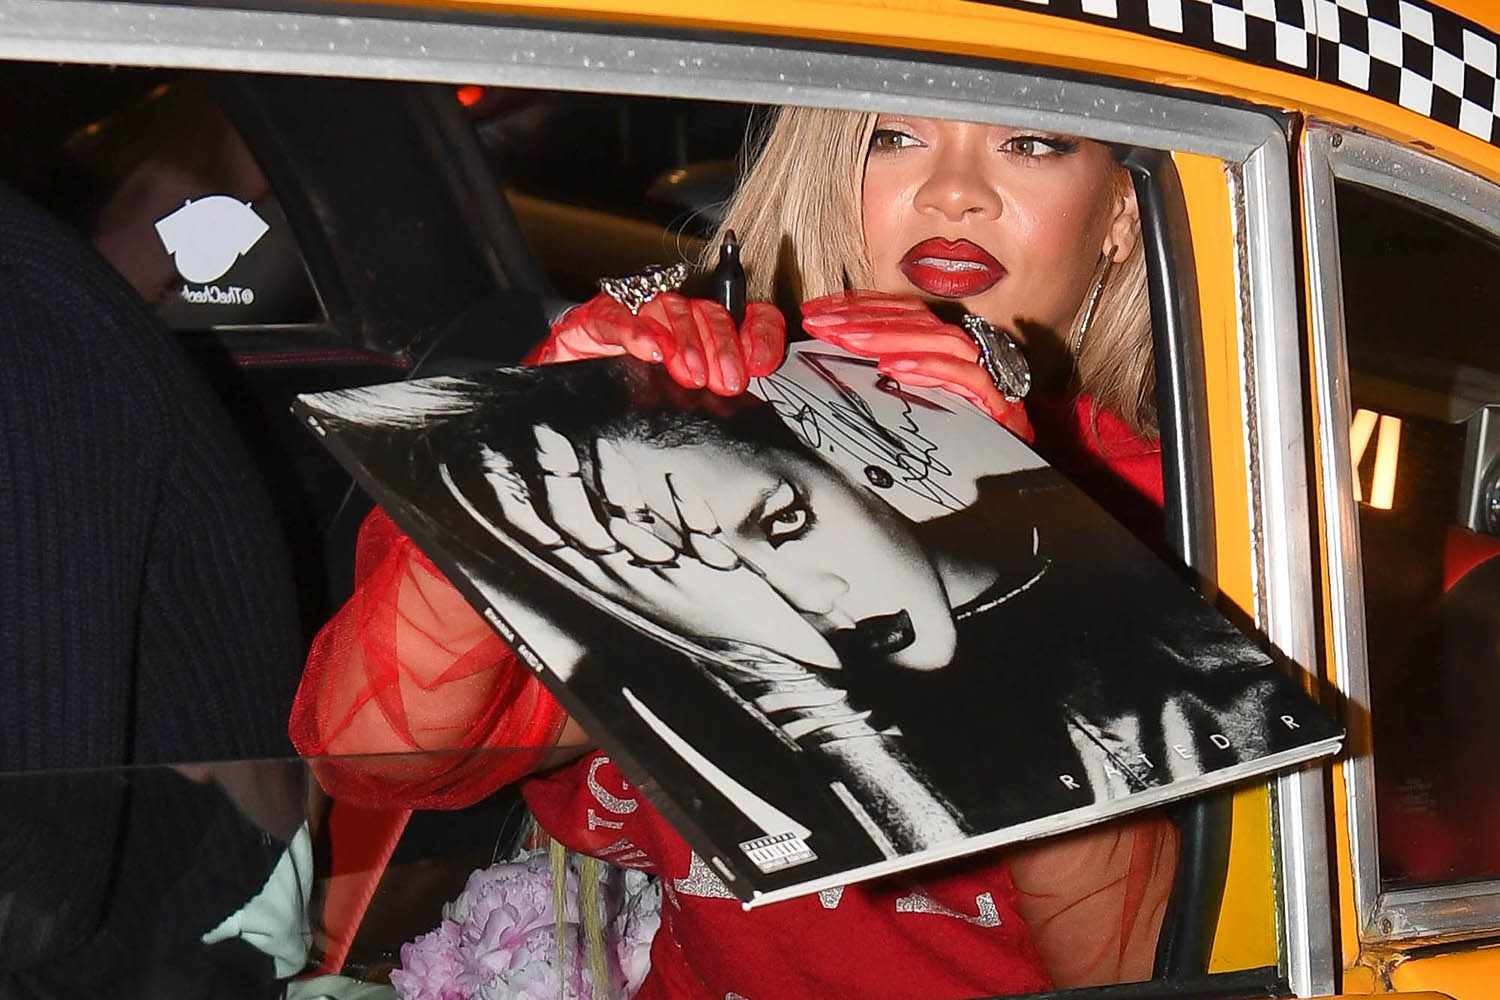 Rihanna Rides the Yellow Cab in New York City, Plus Prince Harry and Meghan Markle, Patrick Dempsey and More